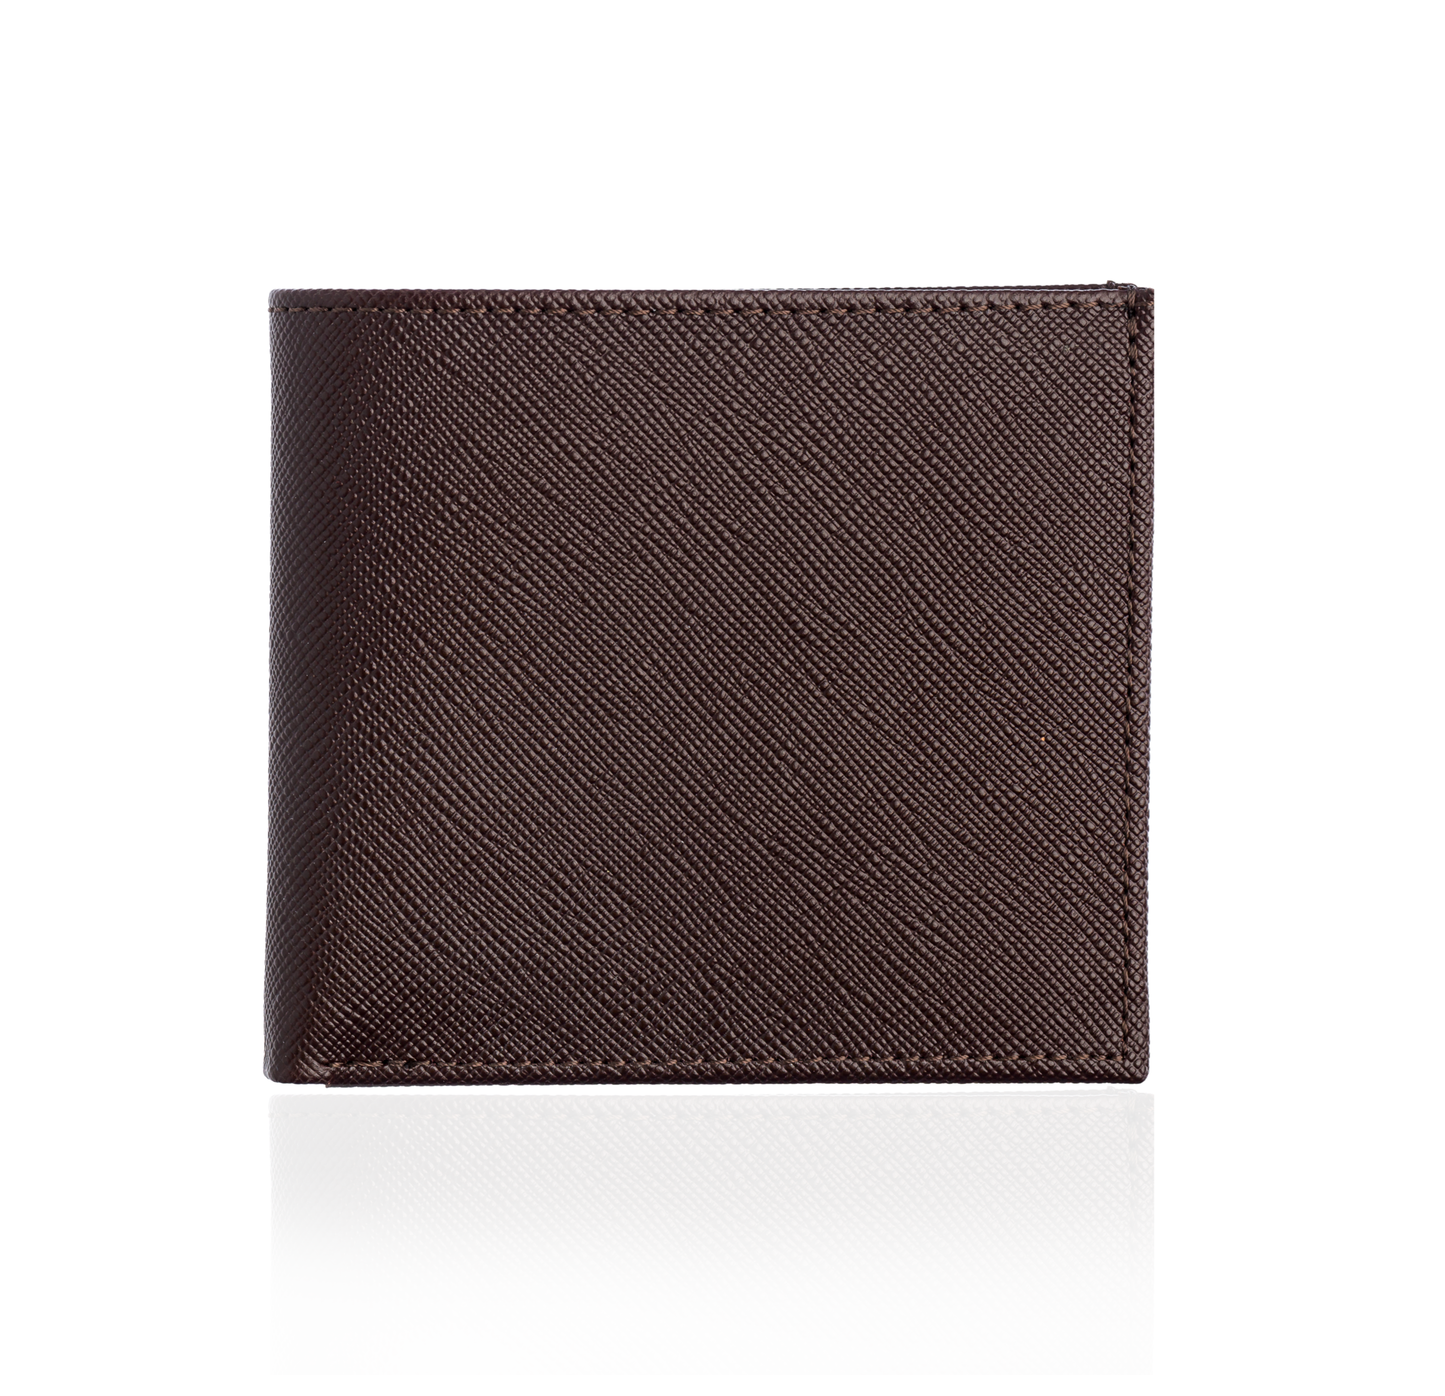 Brown Textured Leather Wallet